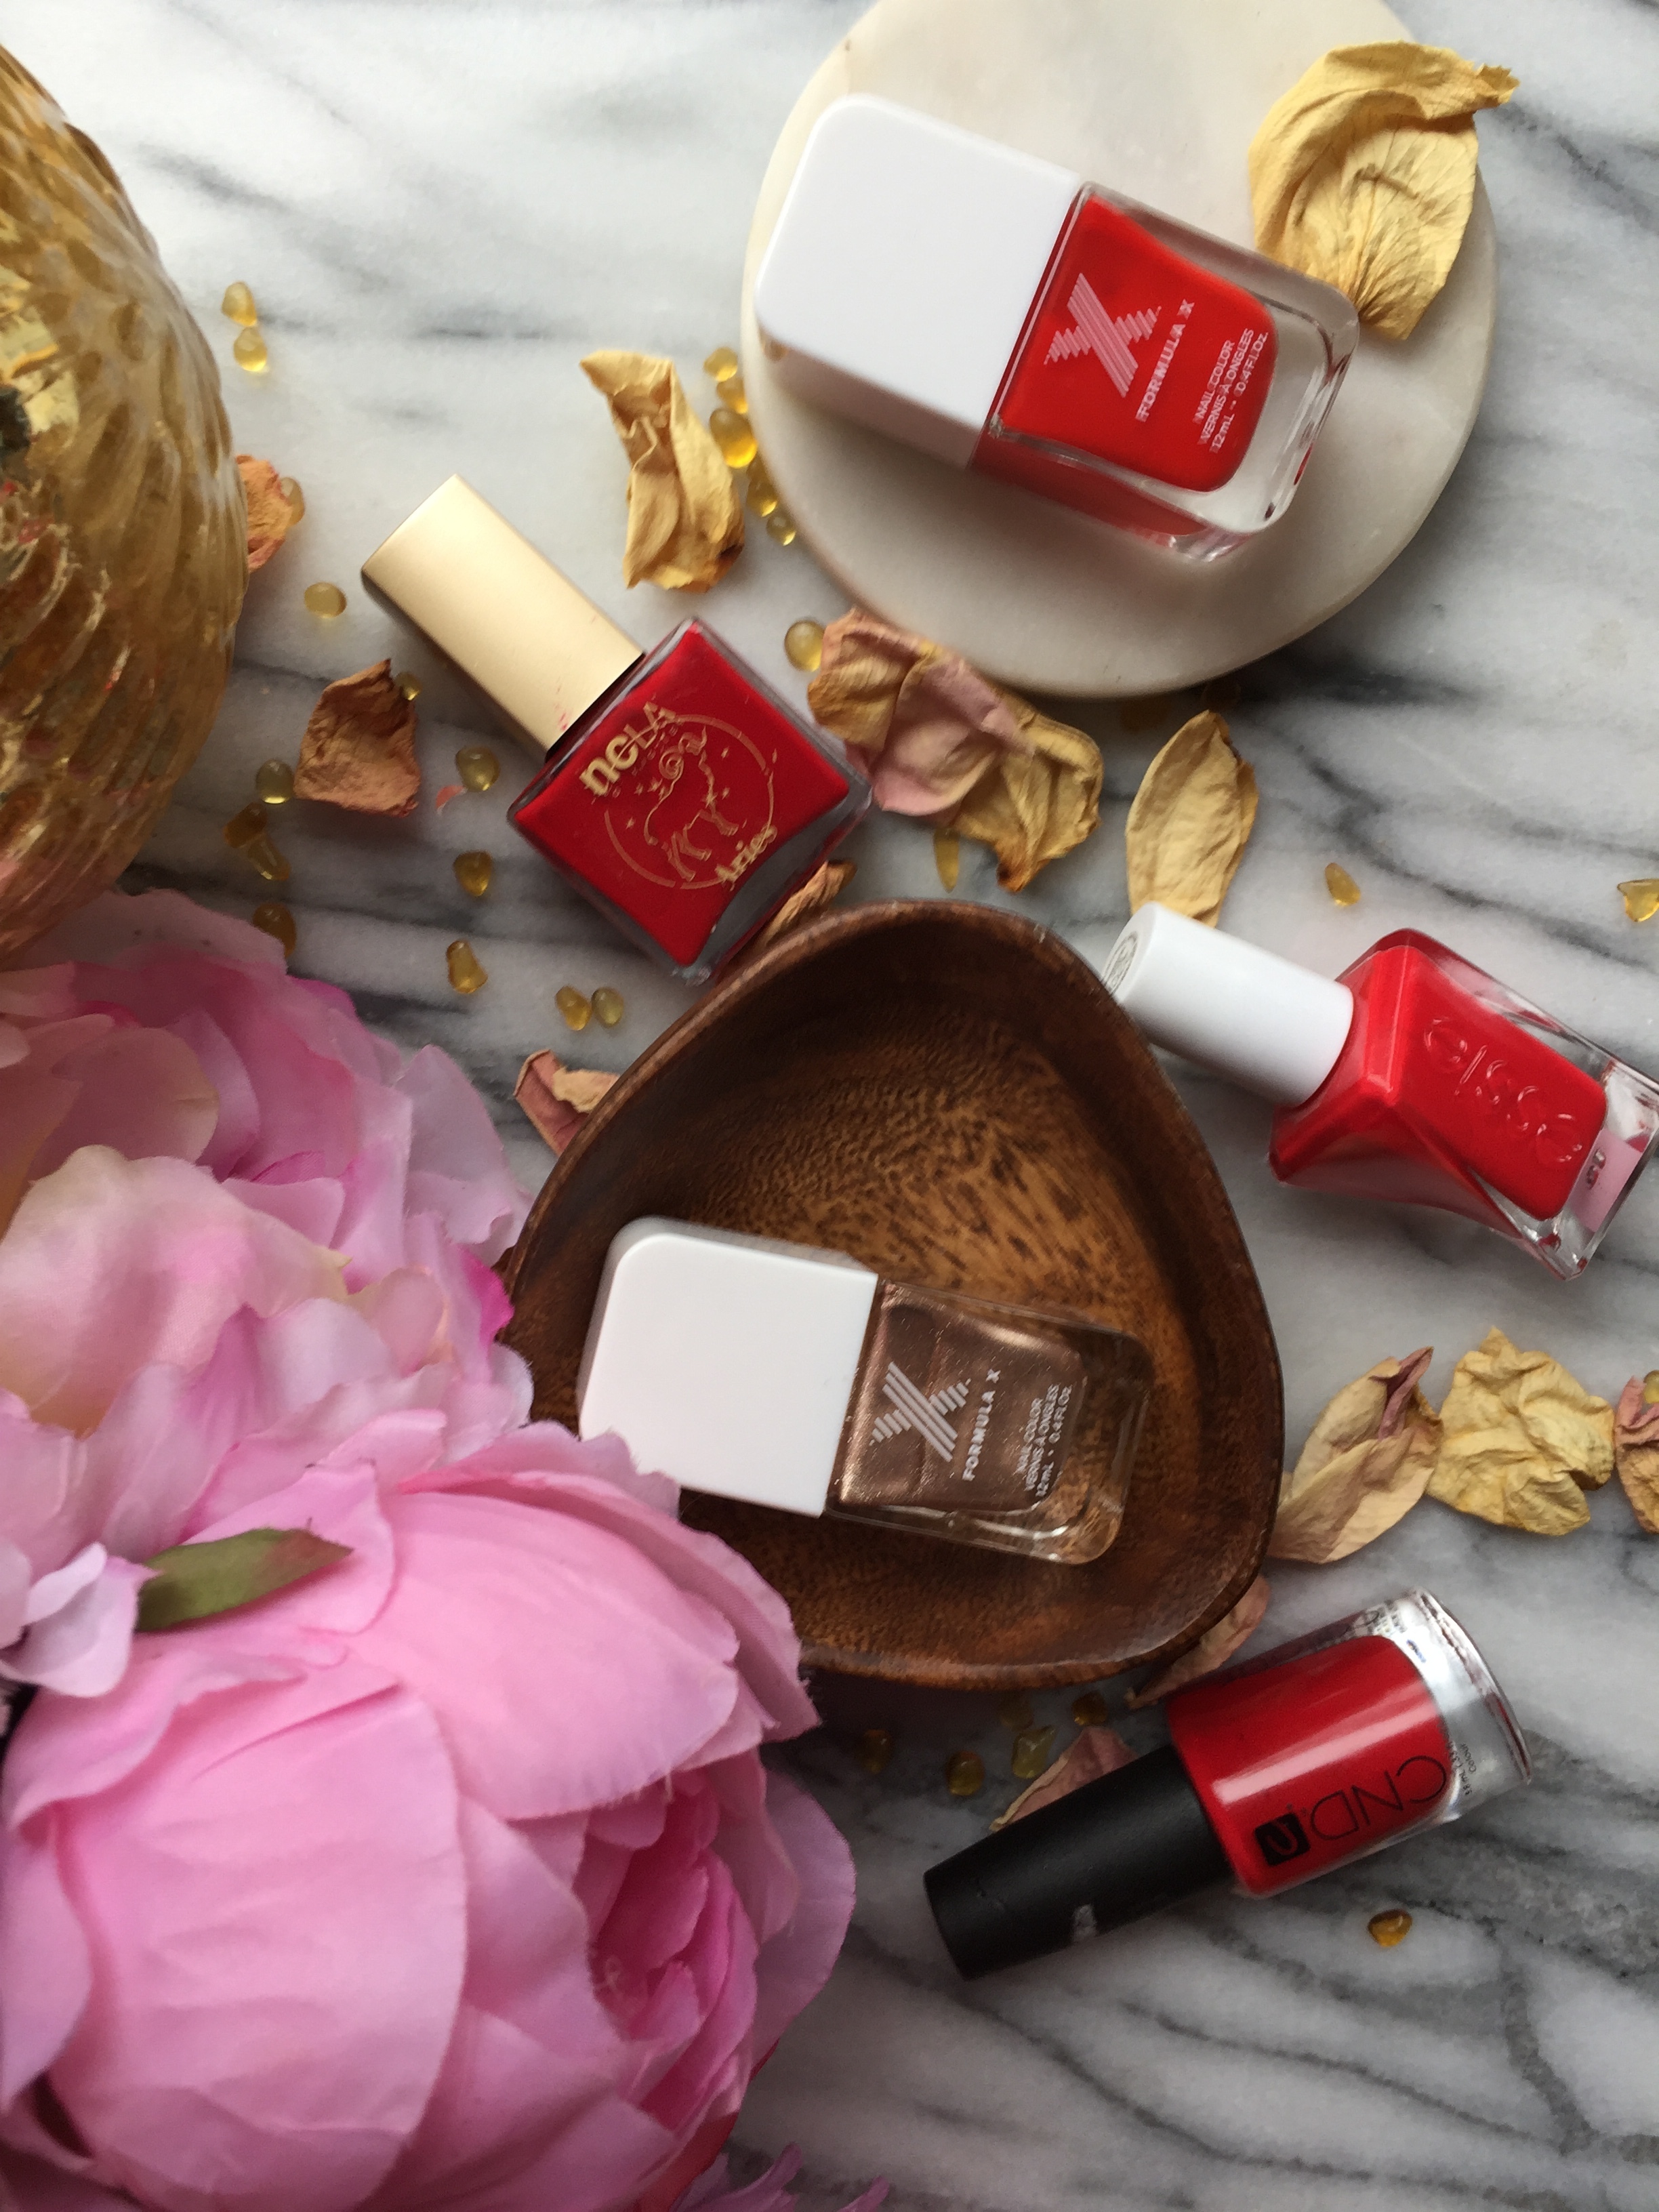 NCLA Aries, CND Rouge Red, Essie Rock The Runway, Formula X Haute Sauce and Formula X Revved Up